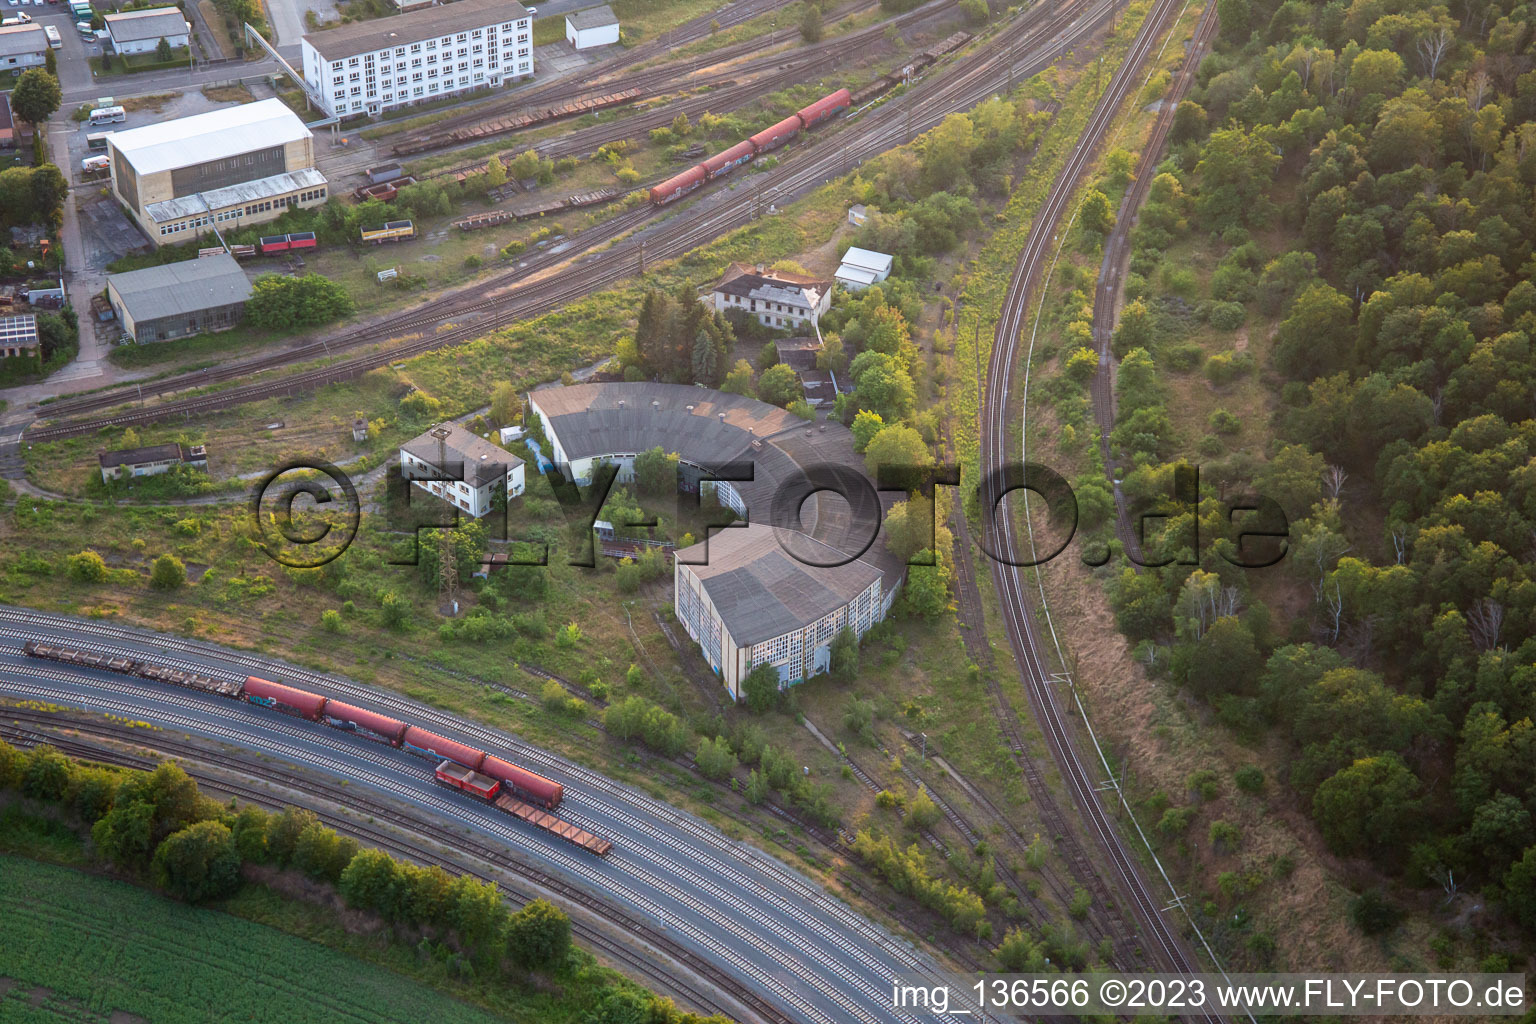 Track triangle with semicircular locomotive shed in Blankenburg in the state Saxony-Anhalt, Germany